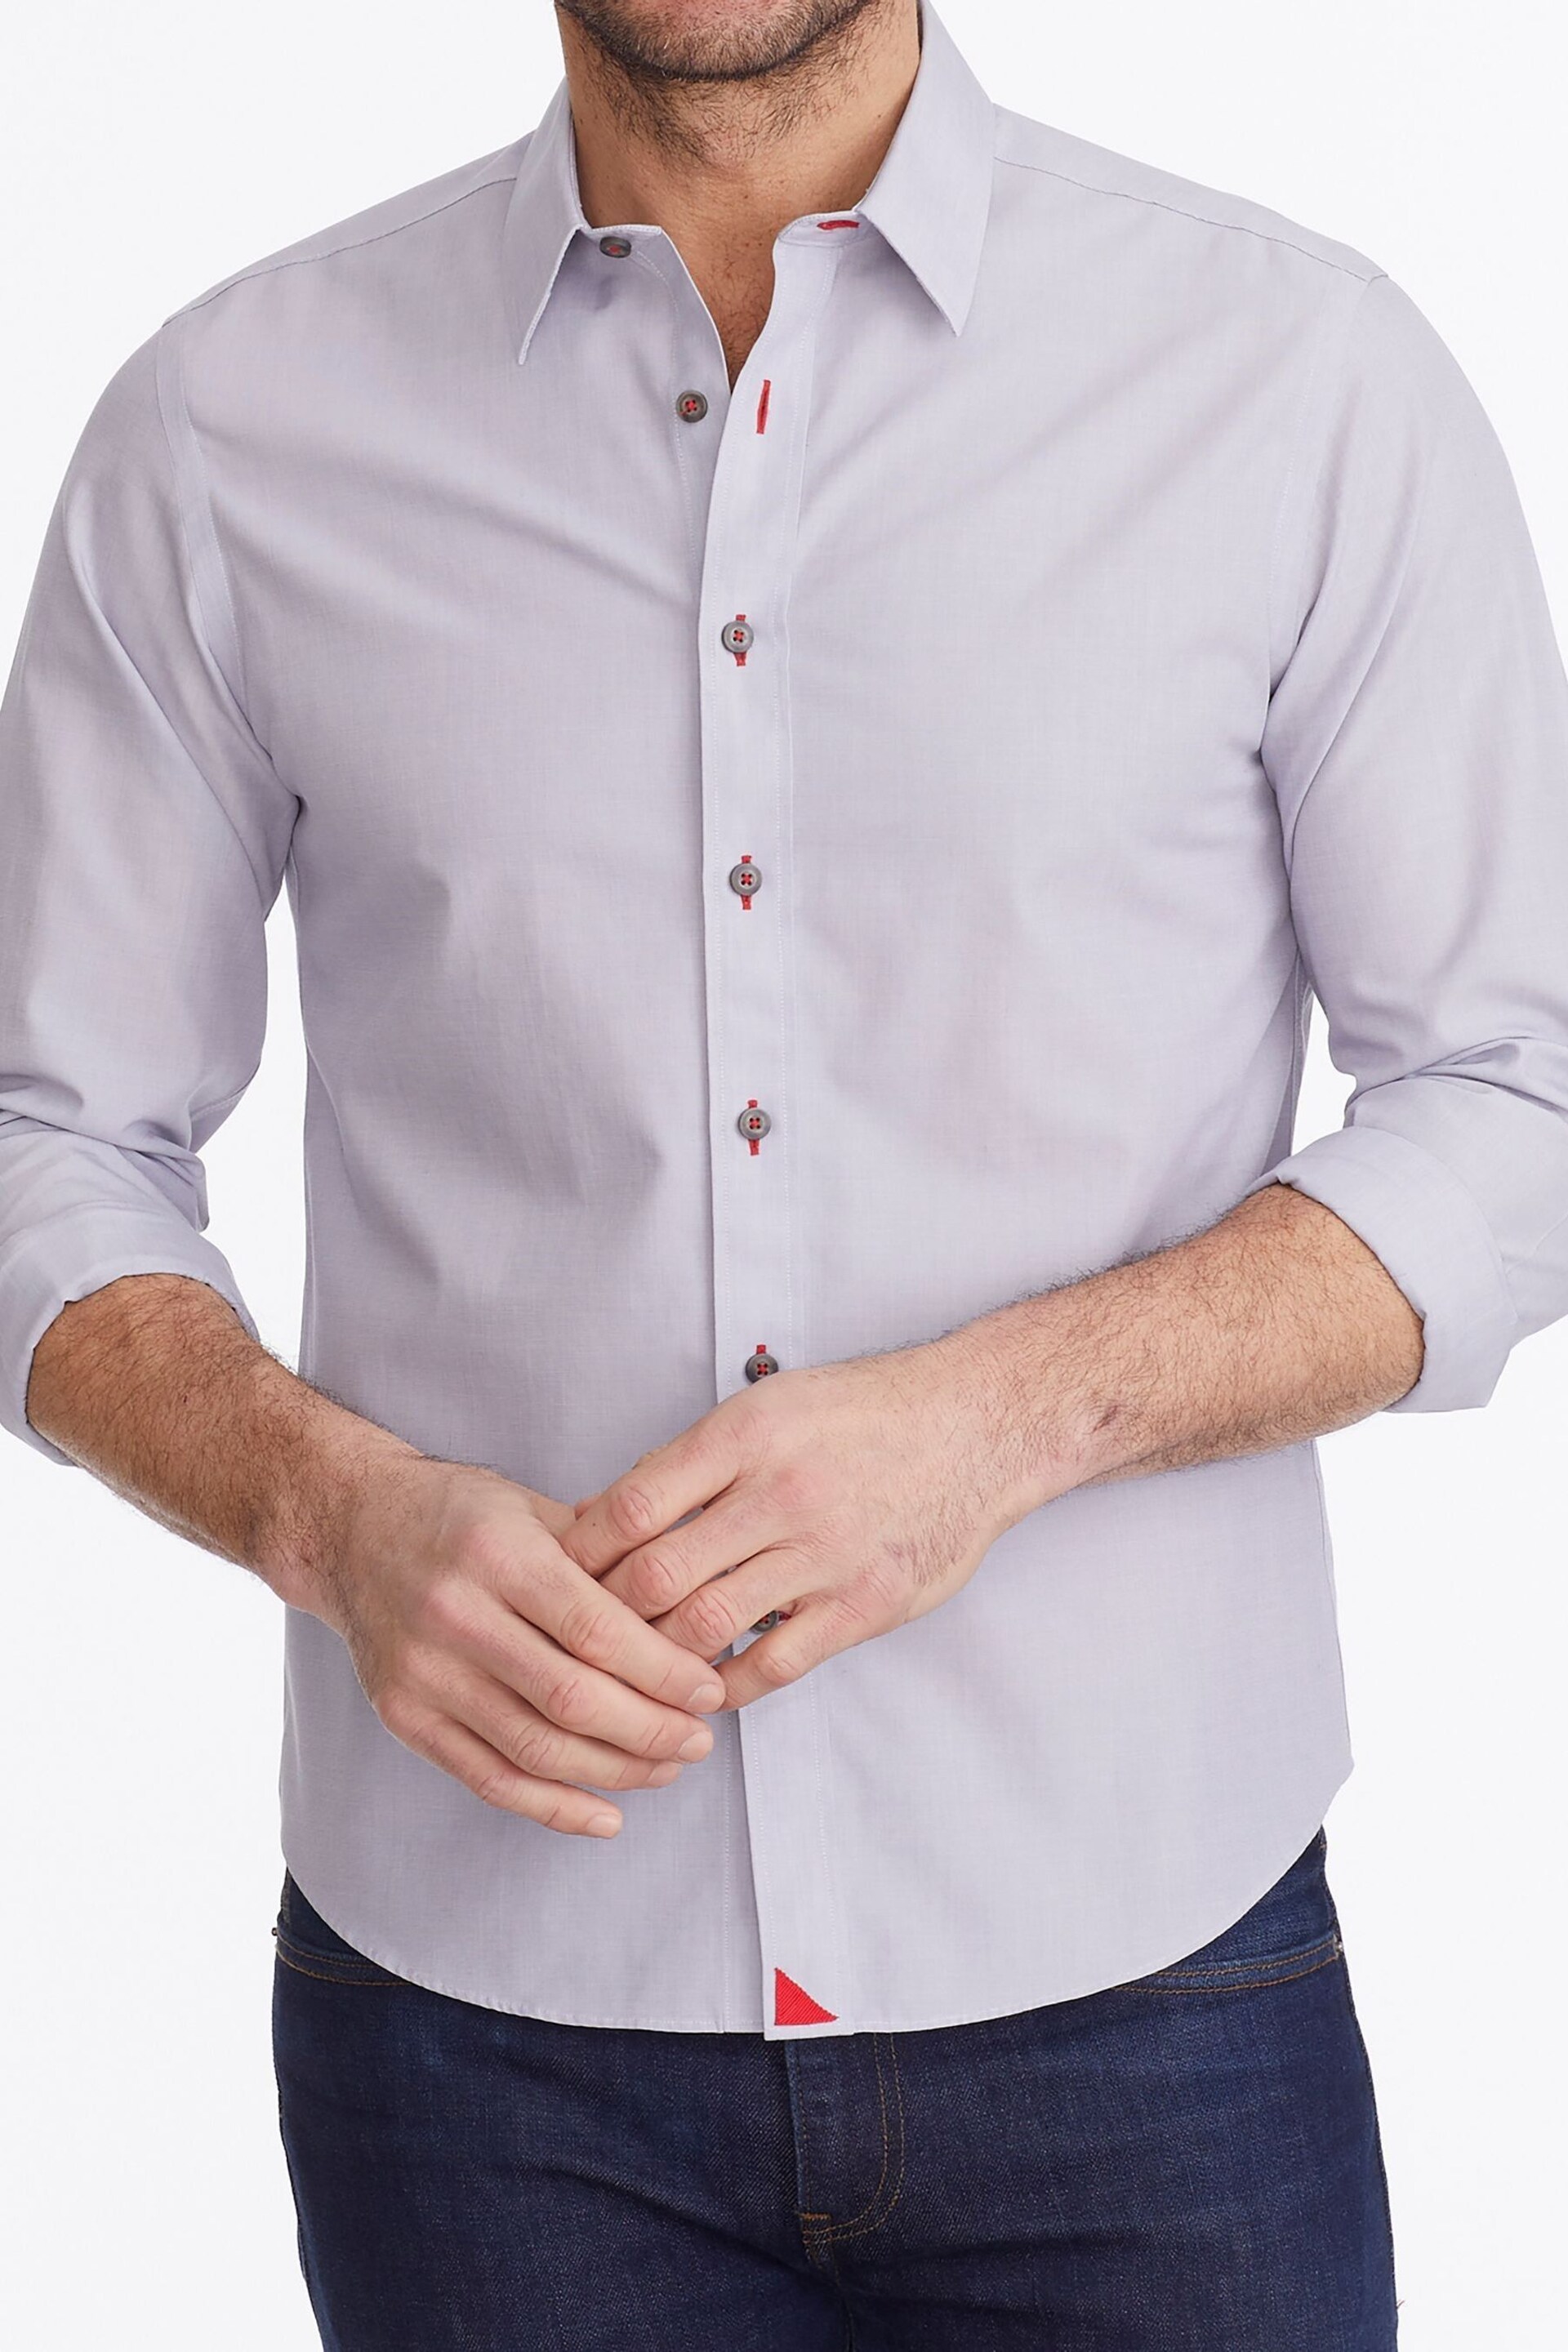 UNTUCKit Grey Light Wrinkle-Free Relaxed Fit Rubican Shirt - Image 3 of 6